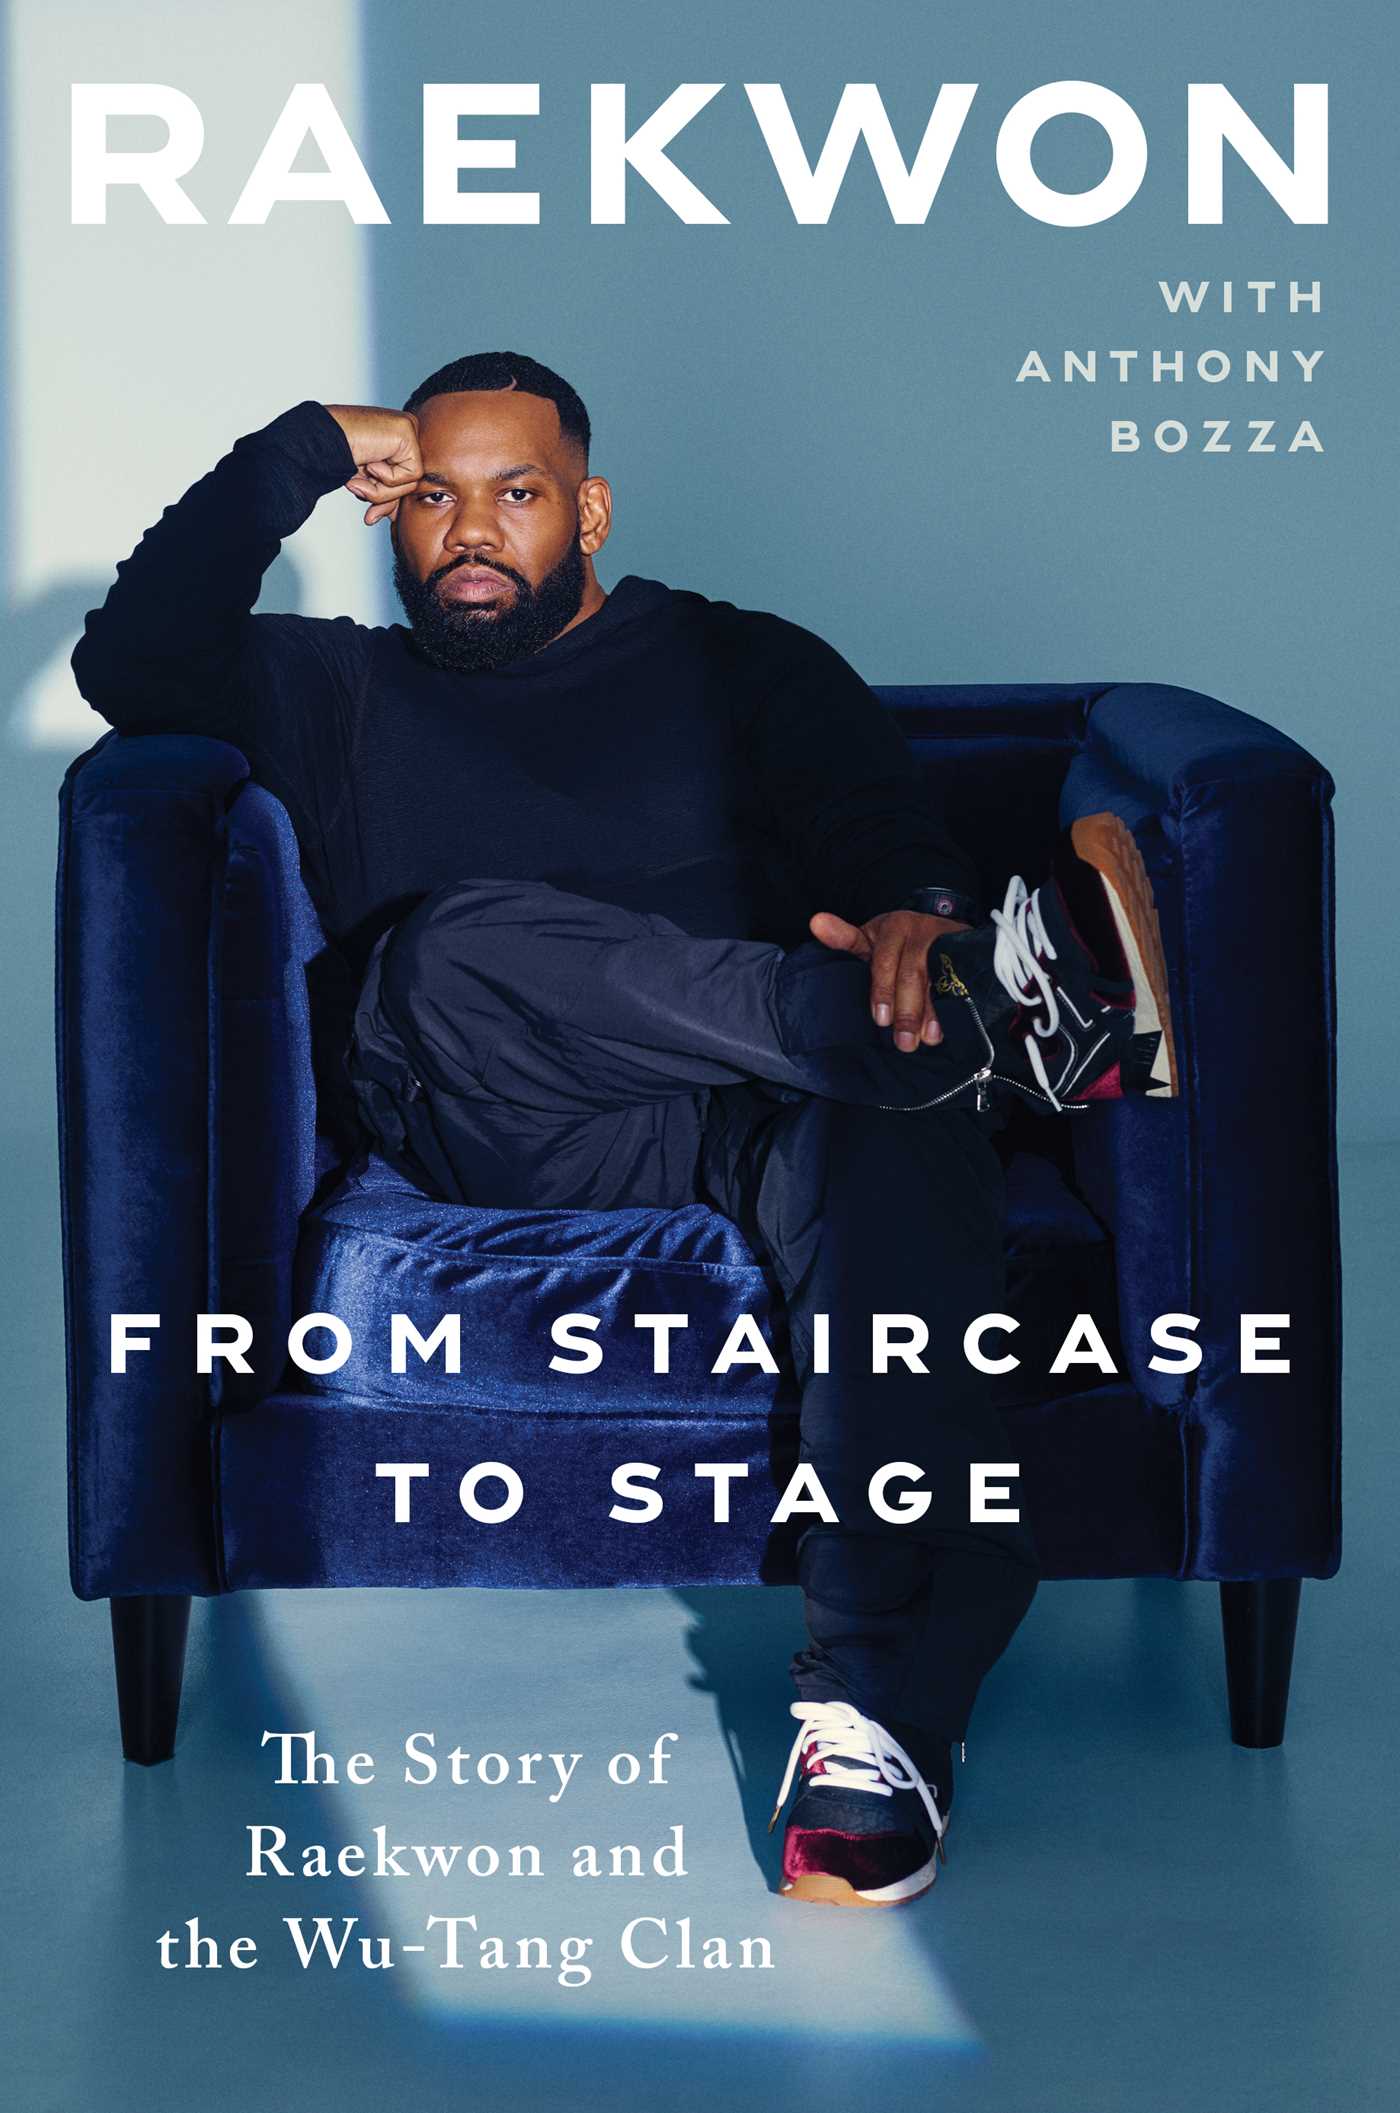 From Staircase to Stage // The Story of Raekwon and the Wu-Tang Clan